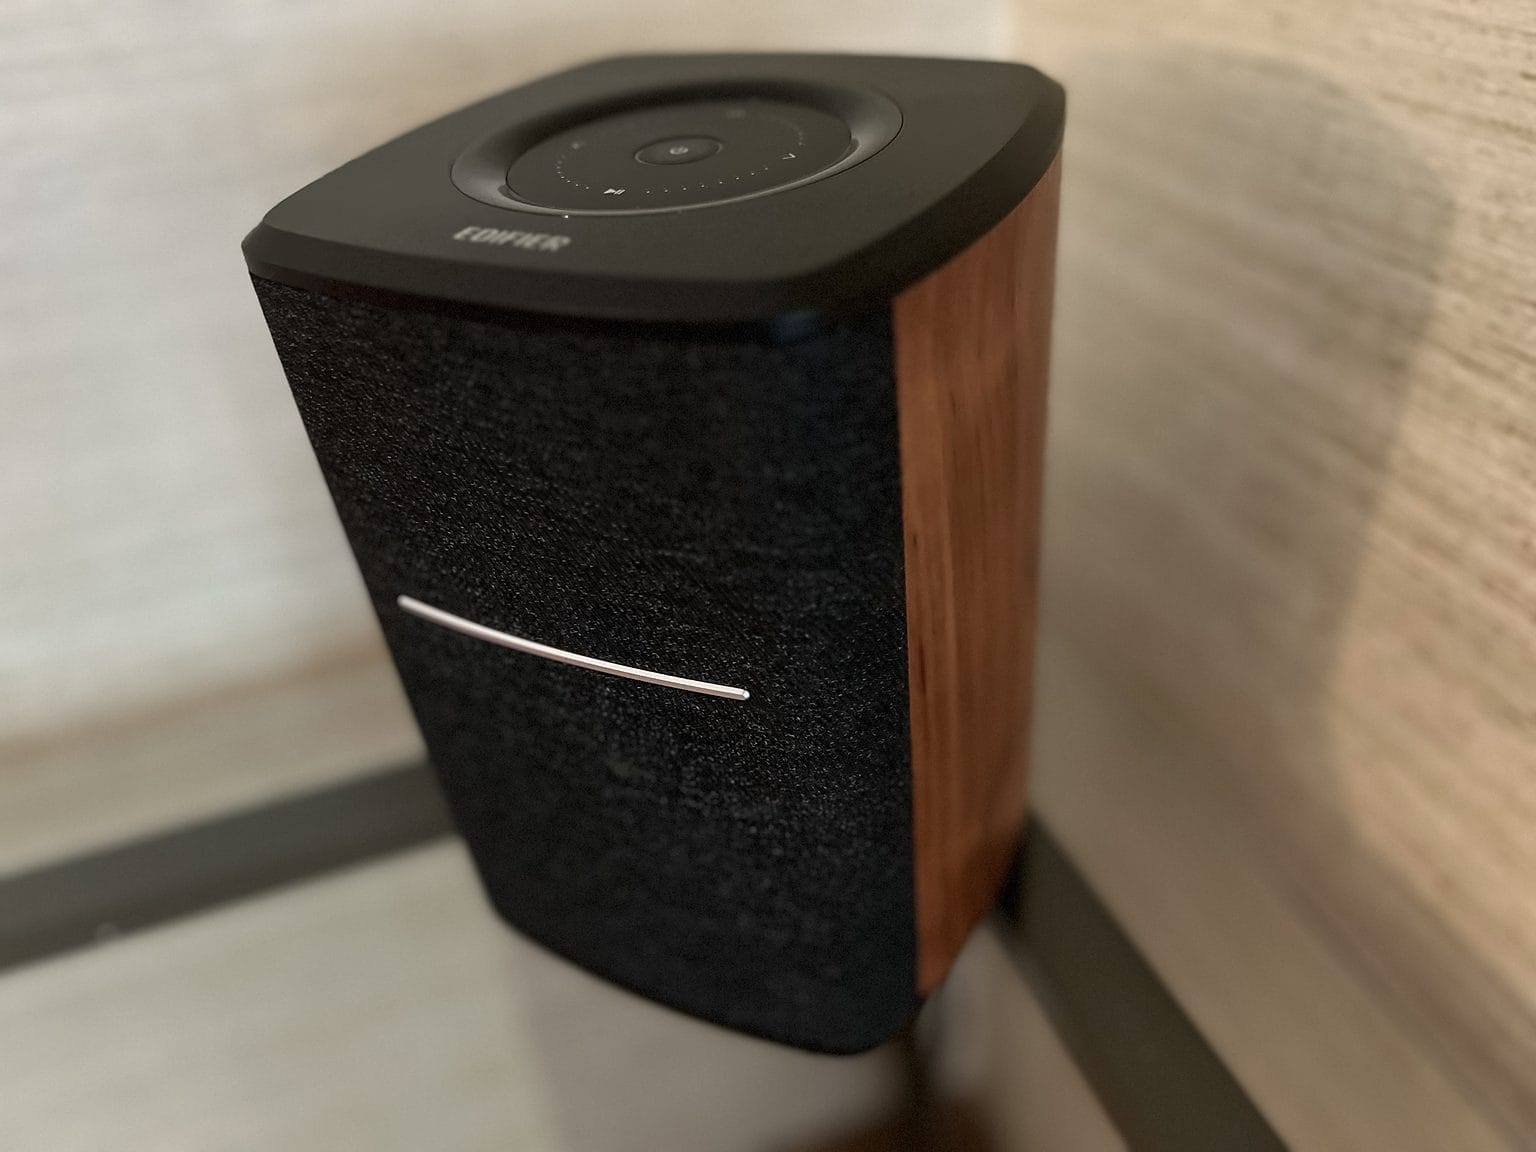 This handsome speaker offers high-quality sound at an attractive price.